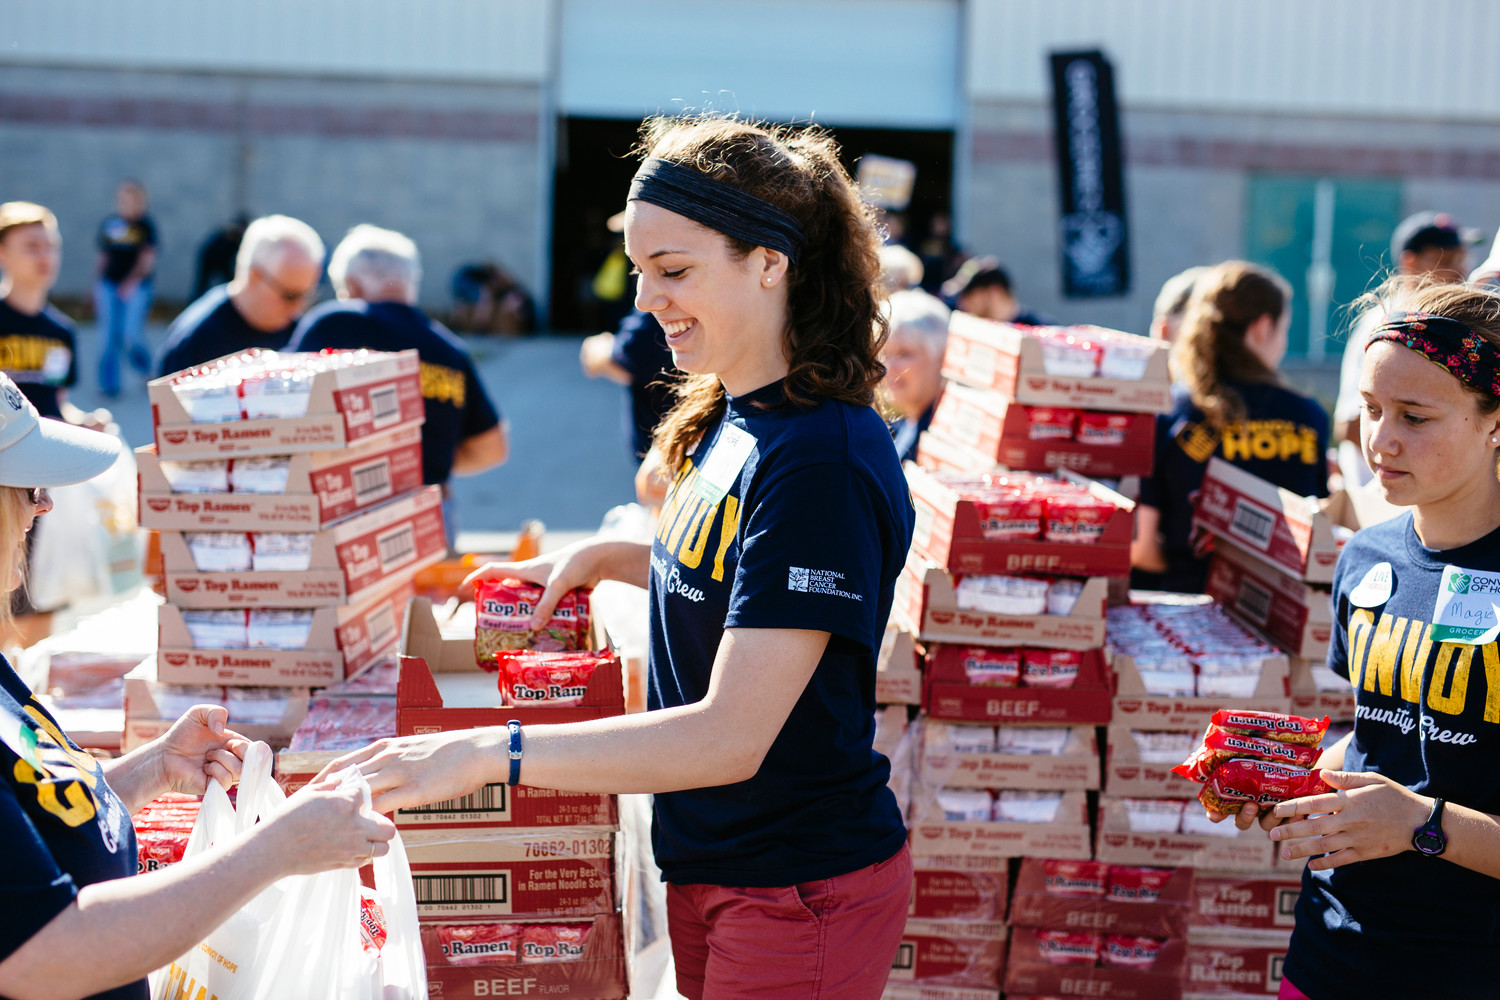 The 2016 Convoy of Hope Springfield Community Event provided $1 million in products and services to low-income families and individuals.